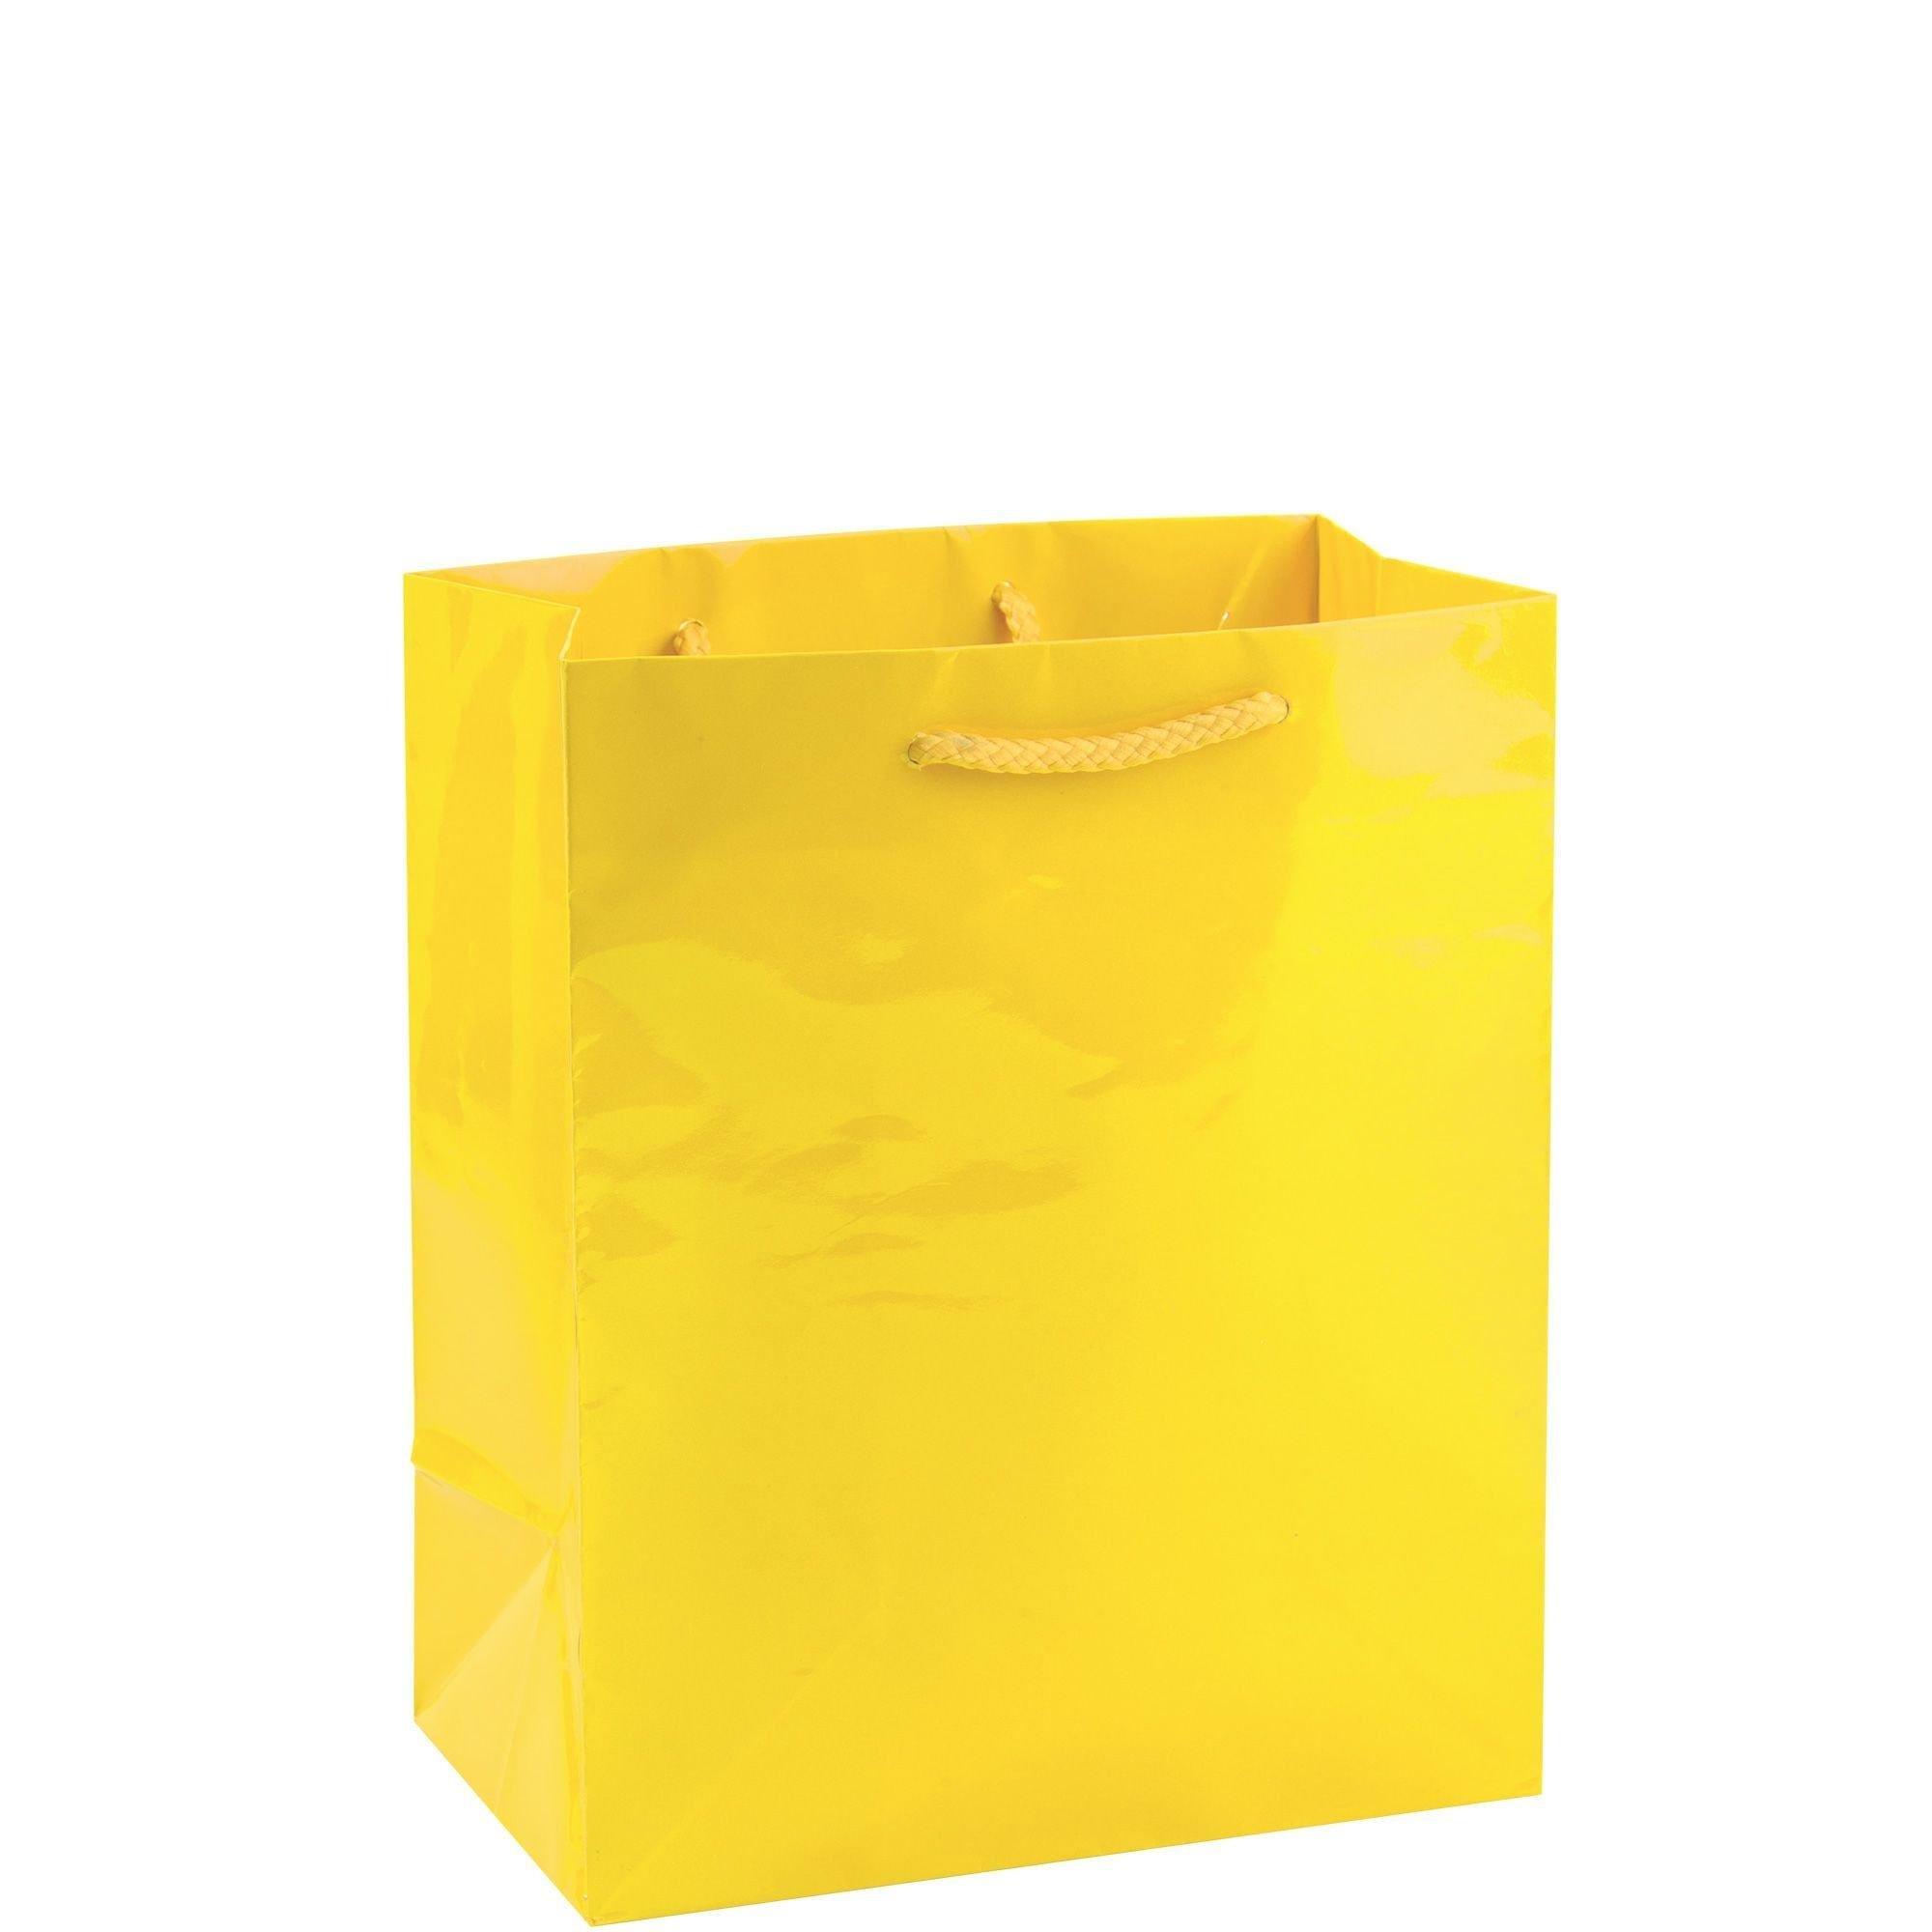 Deluxe Tinted Color Shopping Bags - 8 x 4 1/2 x 10 1/4, Cub, Yellow